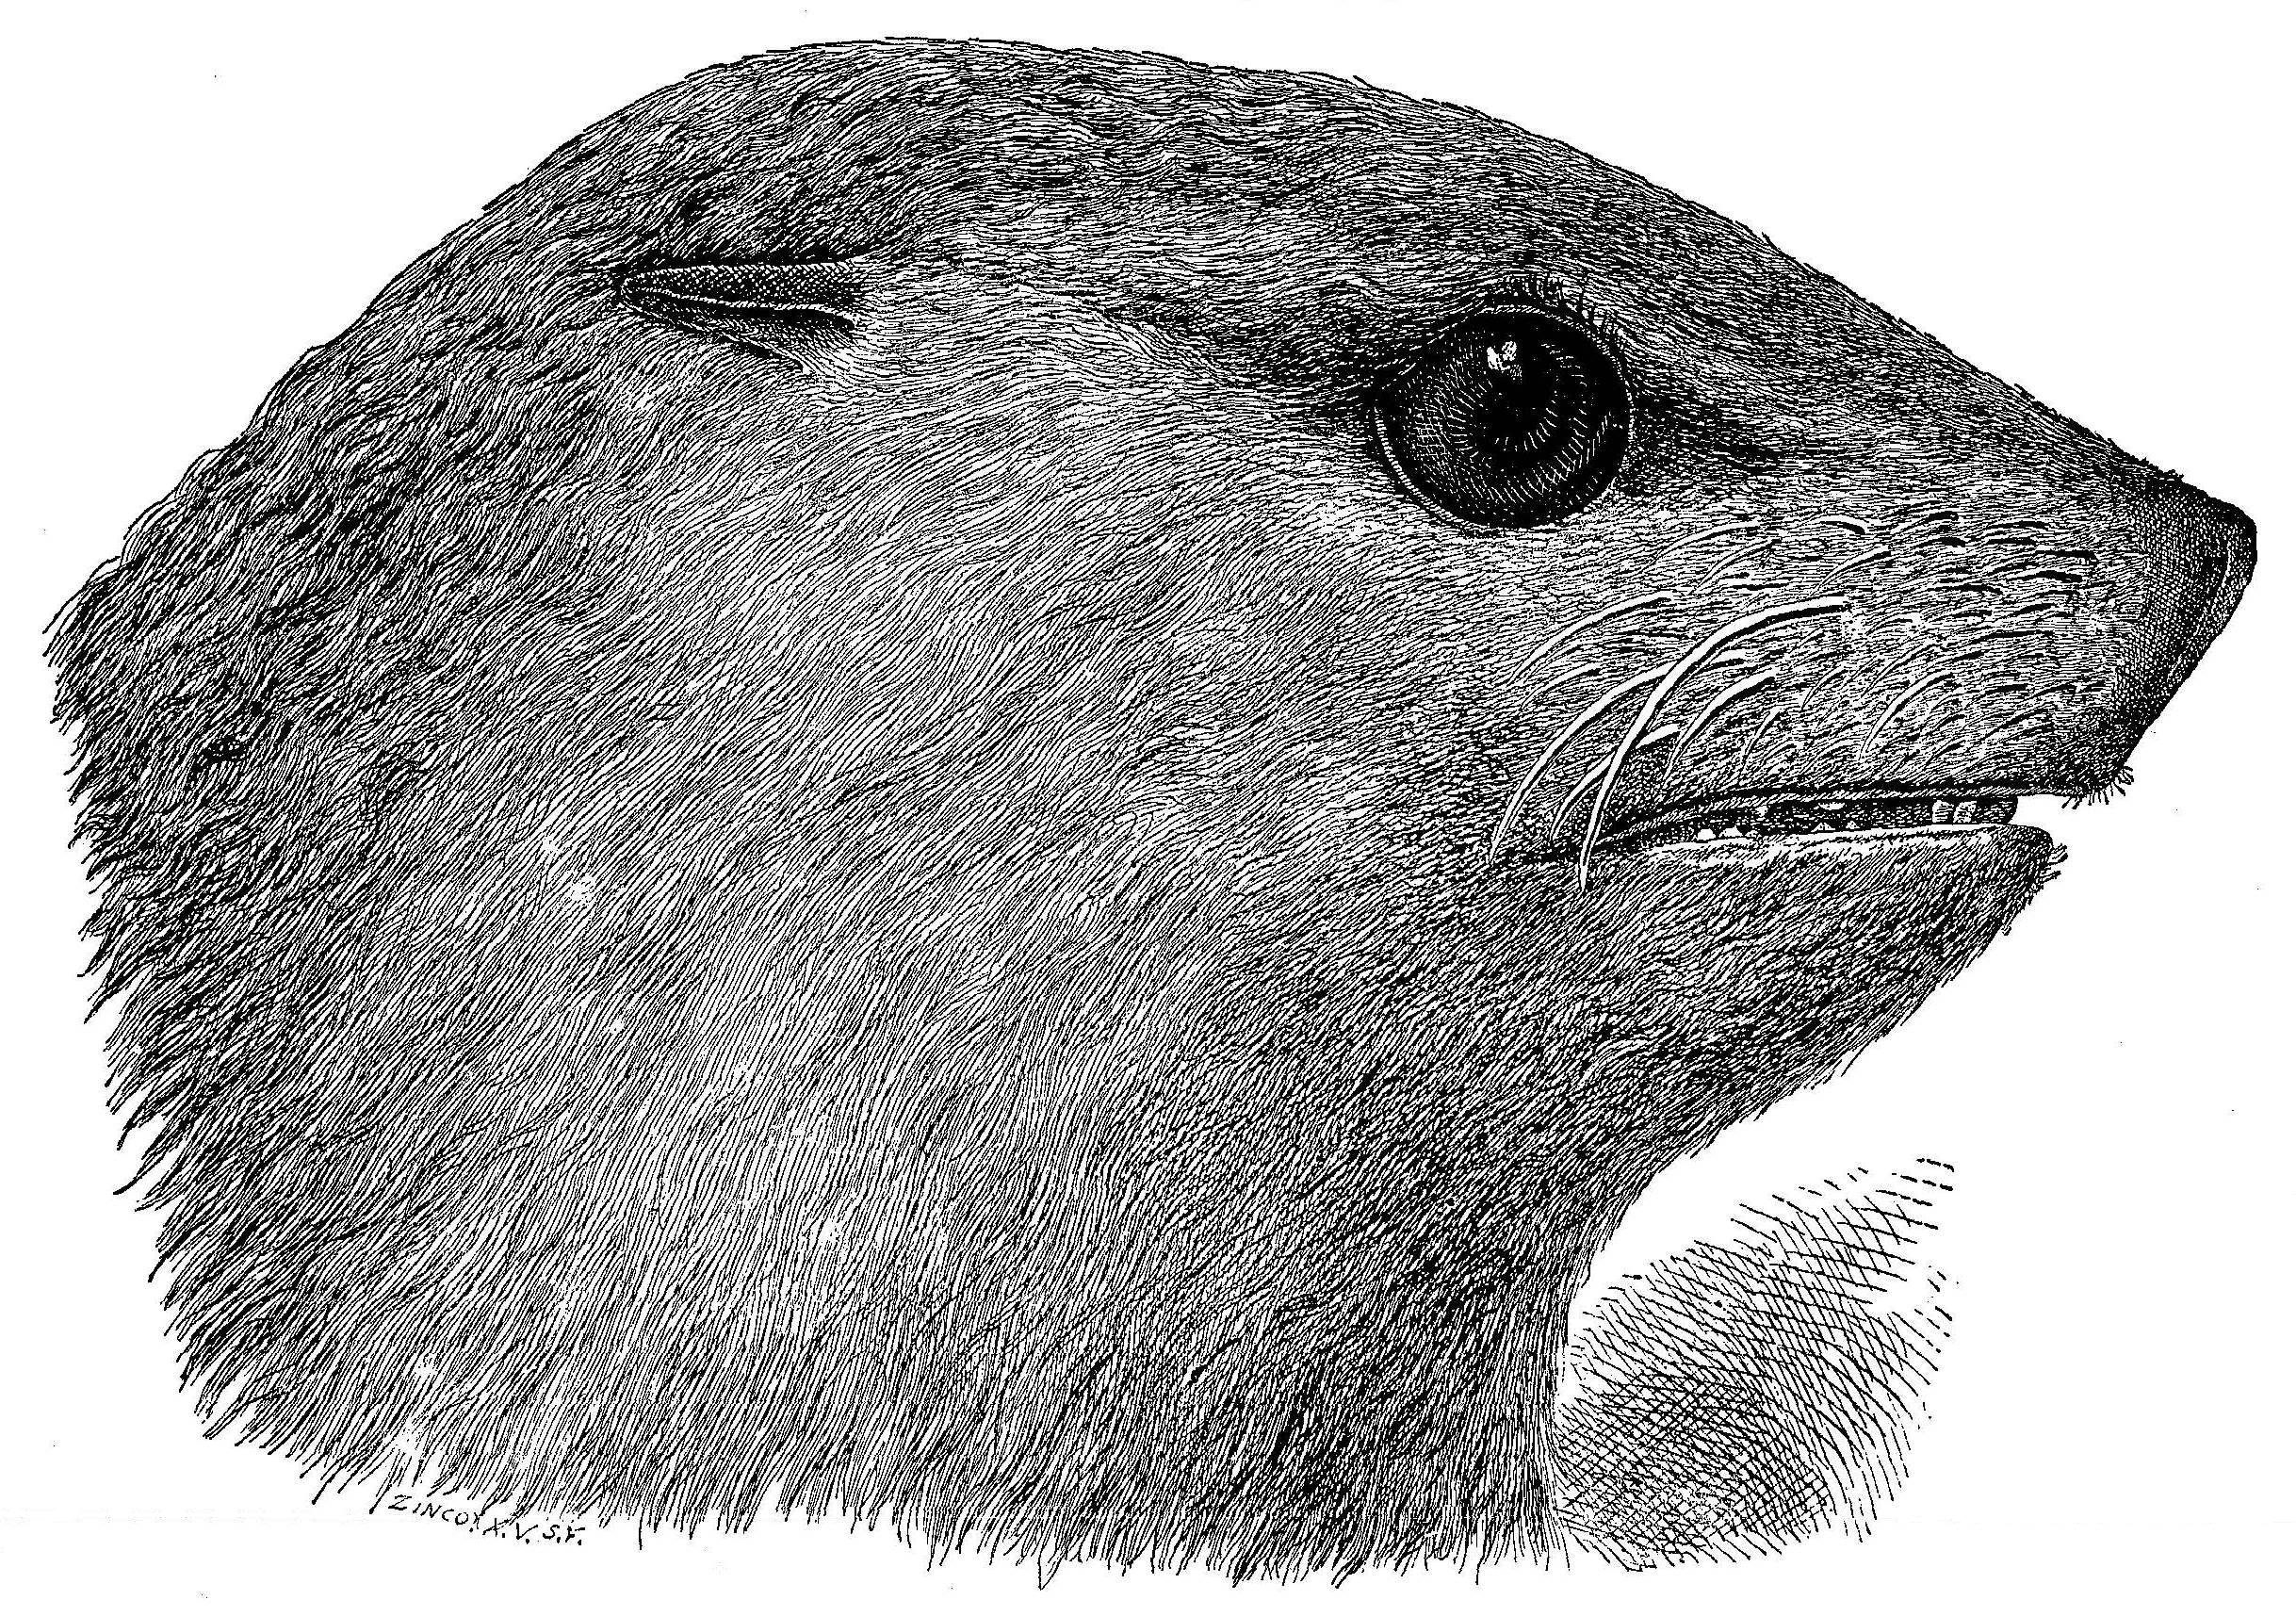 Scammon - No. 3. - Head of Female Fur Seal, Side View, Two-Thirds Natural Size (Drawn by Elliott.)